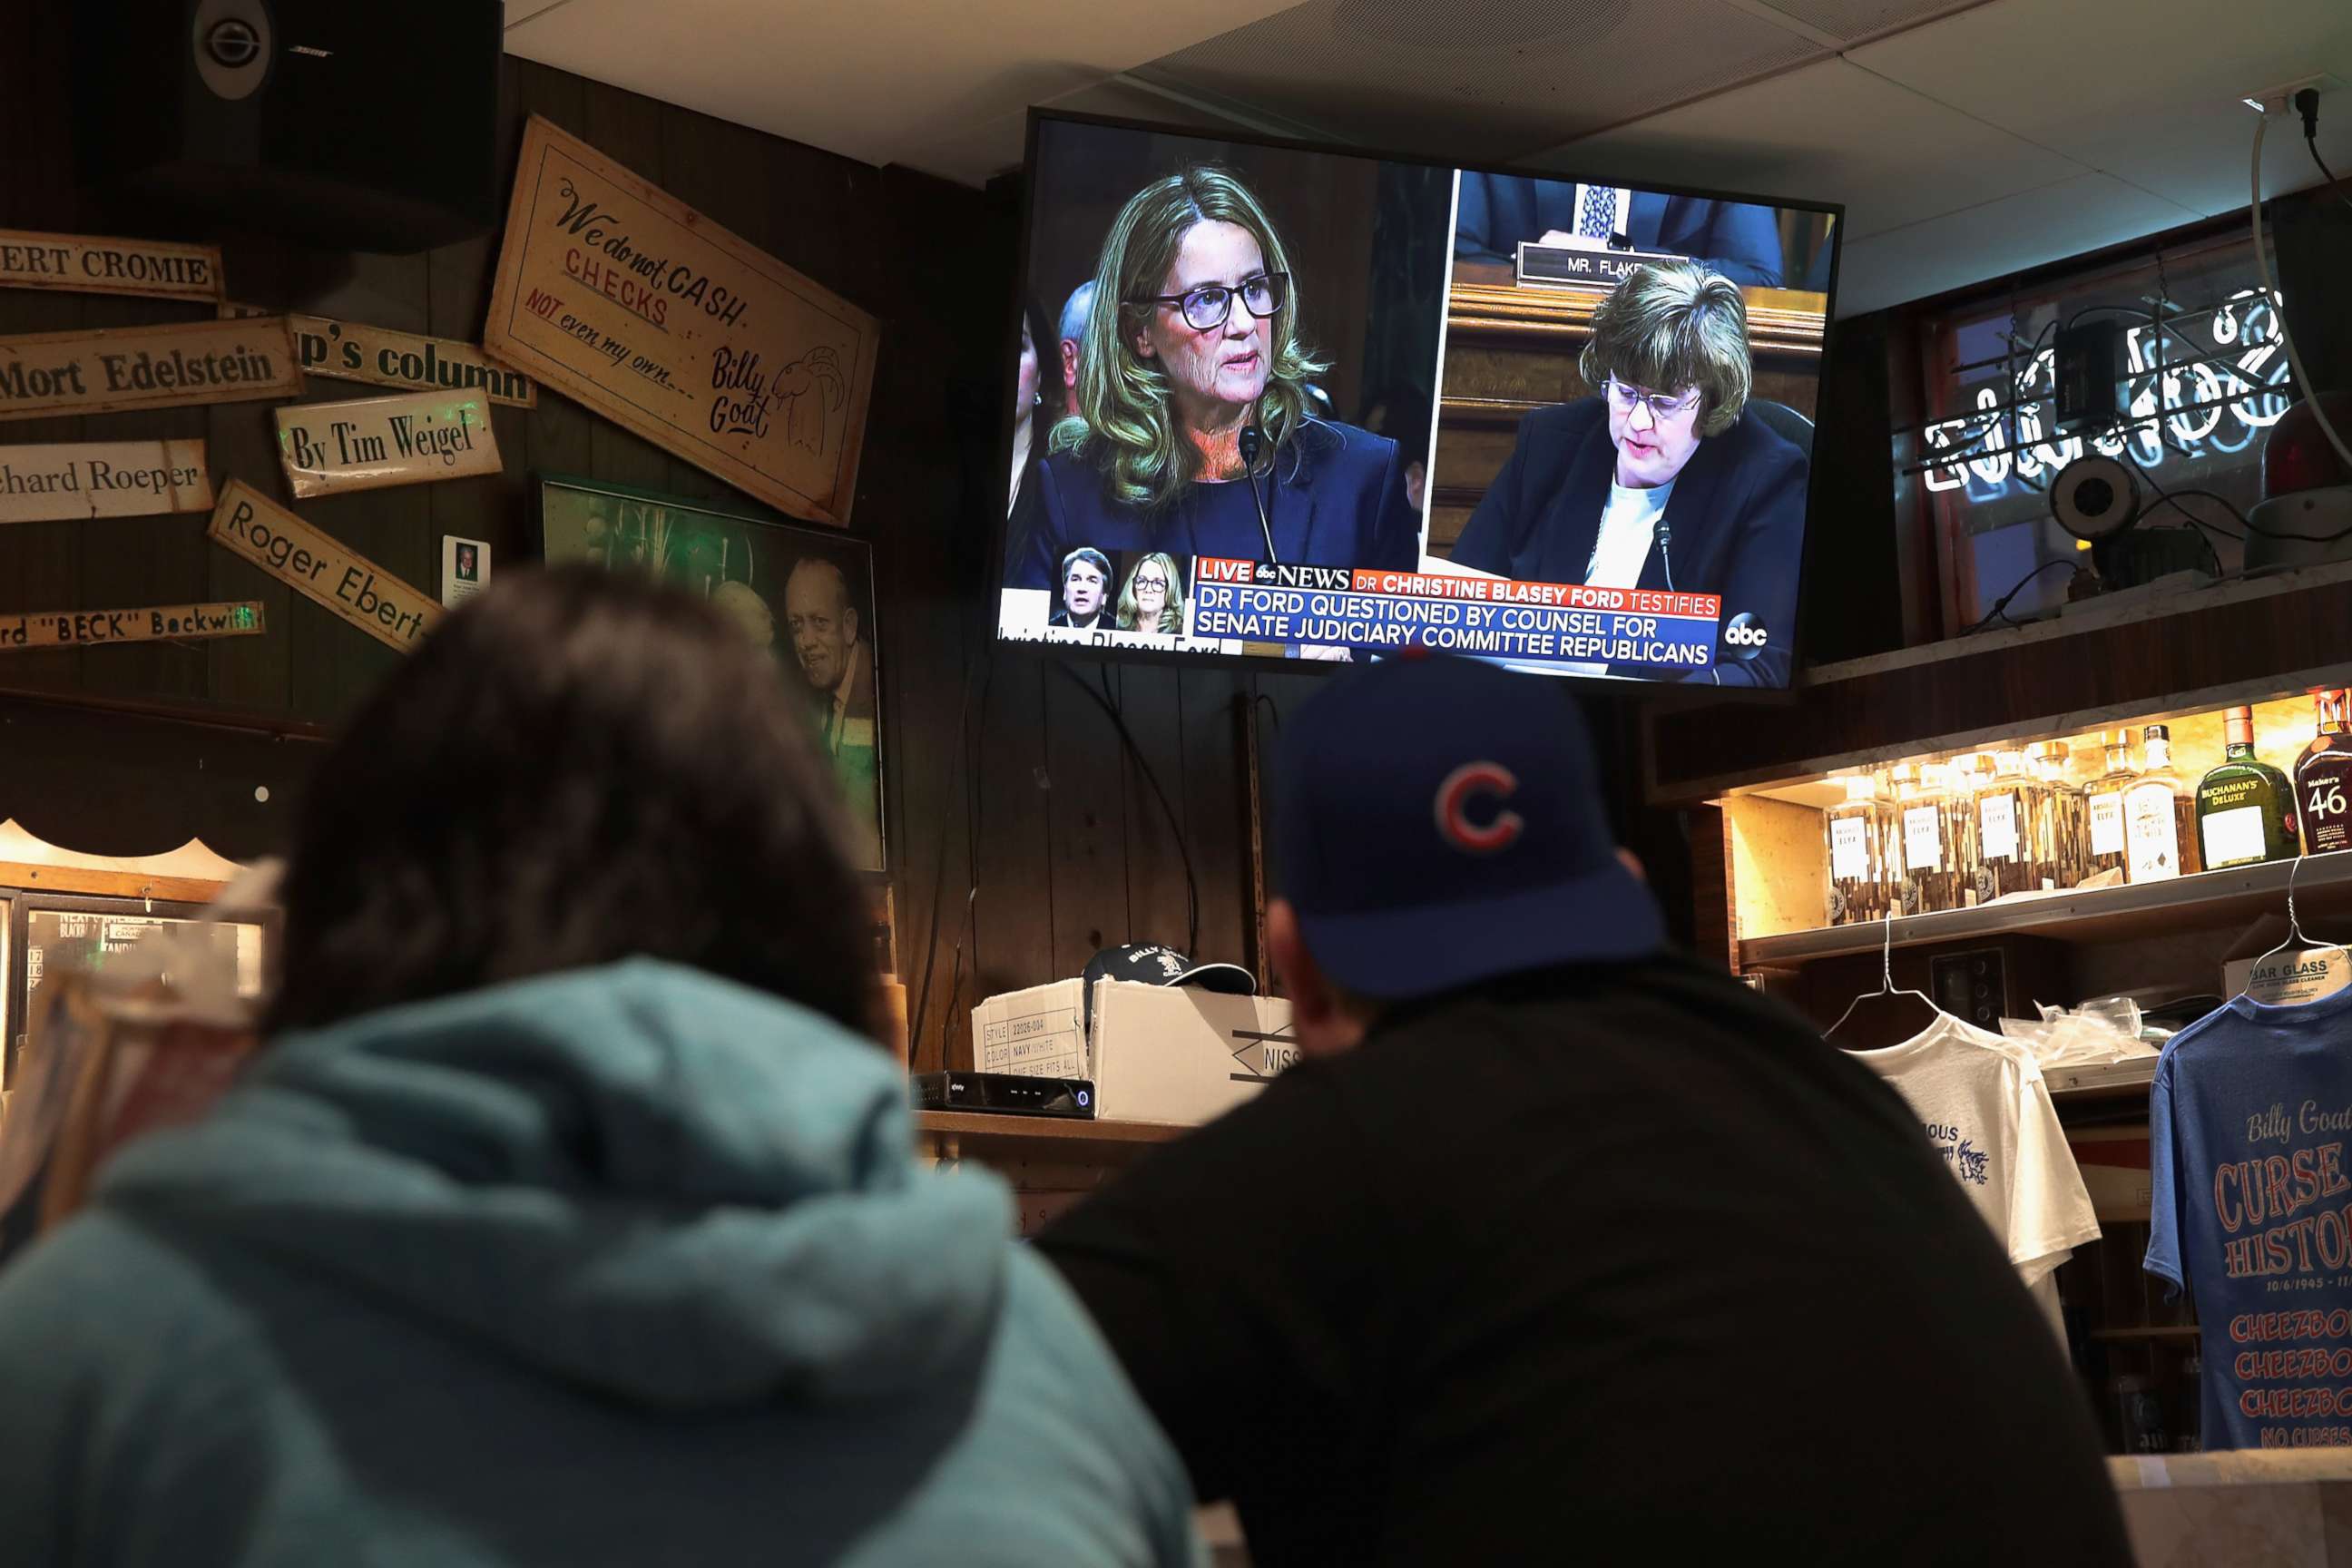 PHOTO: Patrons watch the television at the Billy Goat Tavern during the Senate Judiciary Committee on Capitol Hill, Sept. 27, 2018 in Chicago.